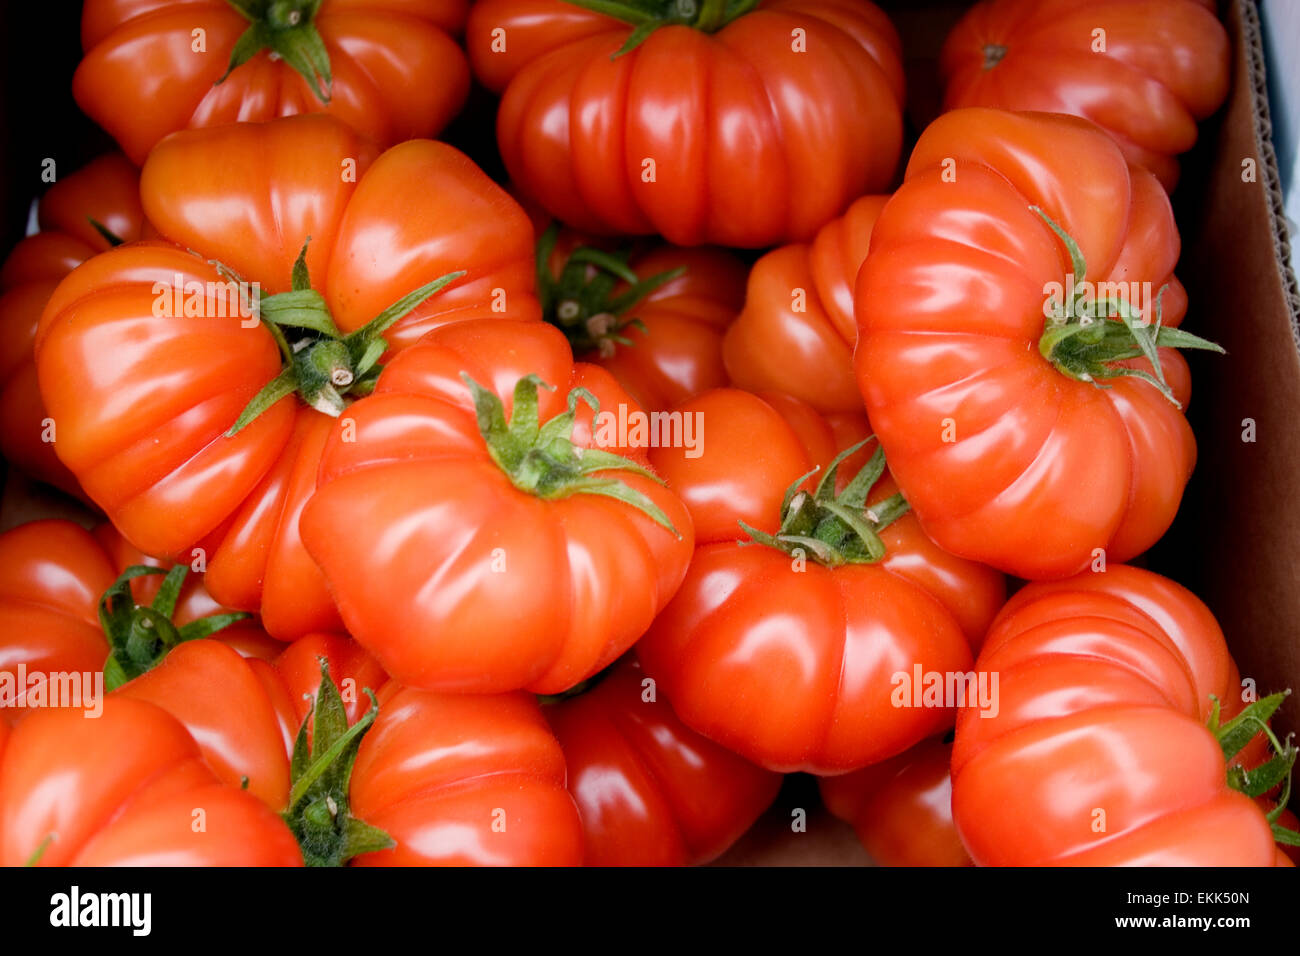 Organic beef  tomatoes  on vine red insecticide free Stock Photo